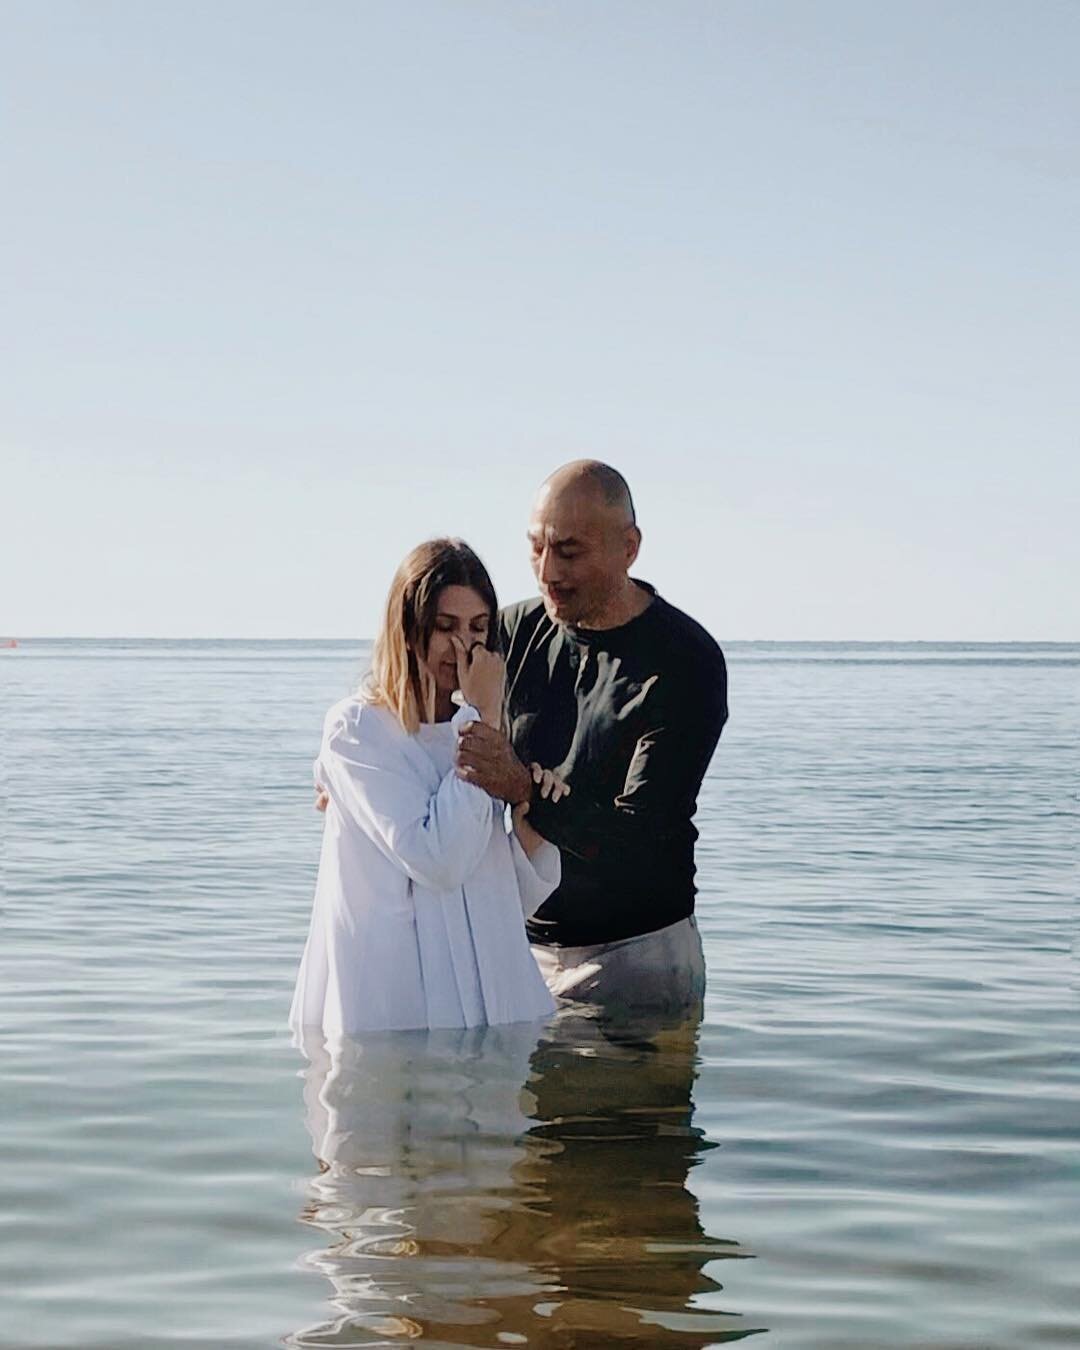 &ldquo;Jesus said to her, &ldquo;I am the resurrection and the life. The one who believes in me will live, even though they die; and whoever lives by believing in me will never die. Do you believe this?&rdquo;&rdquo;
‭‭John‬ ‭11:25-26‬
-
#baptism#res